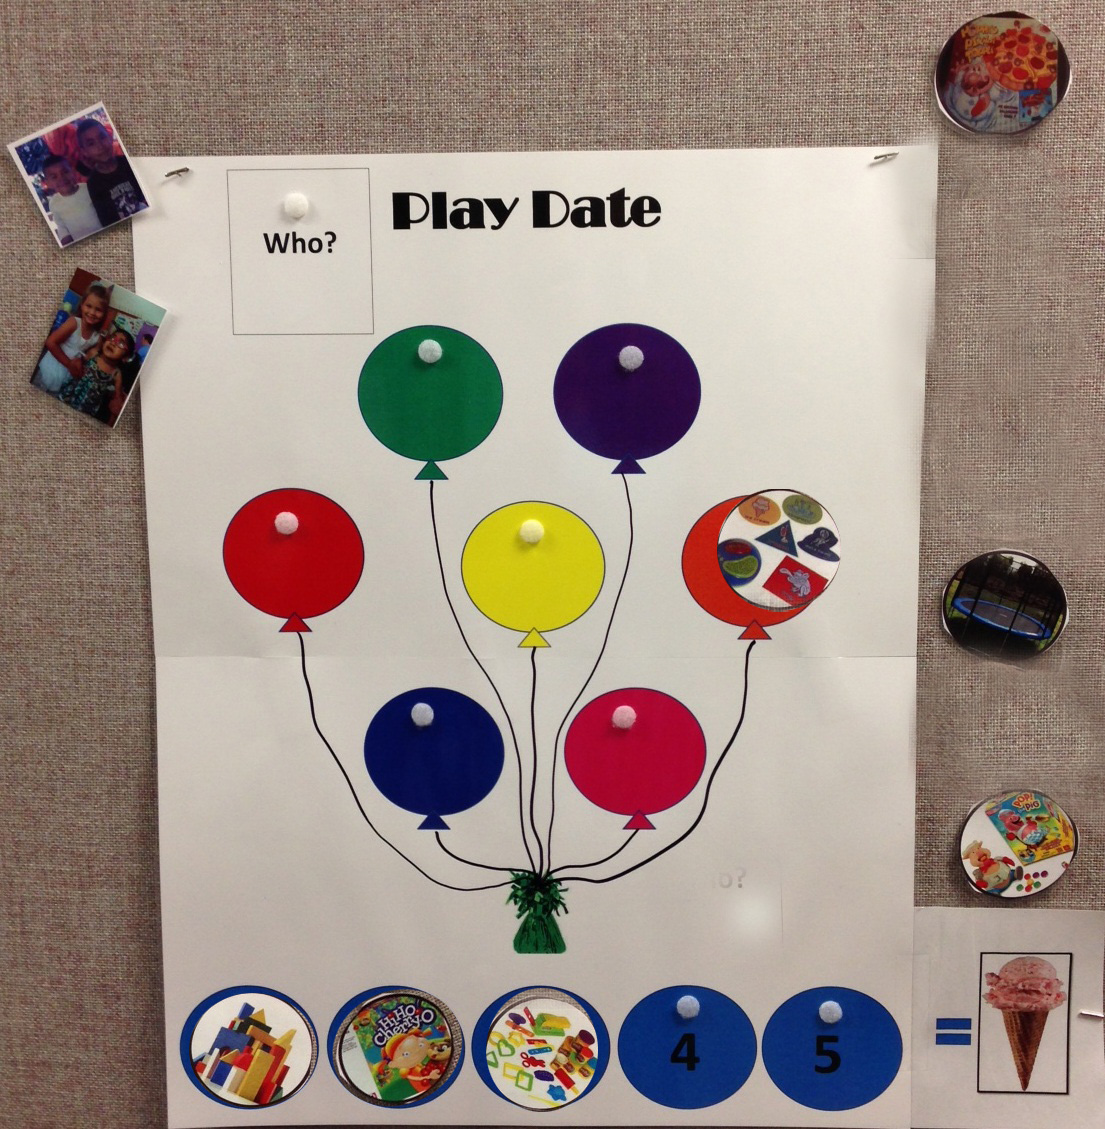 Playdate poster with the balloons in the middle.